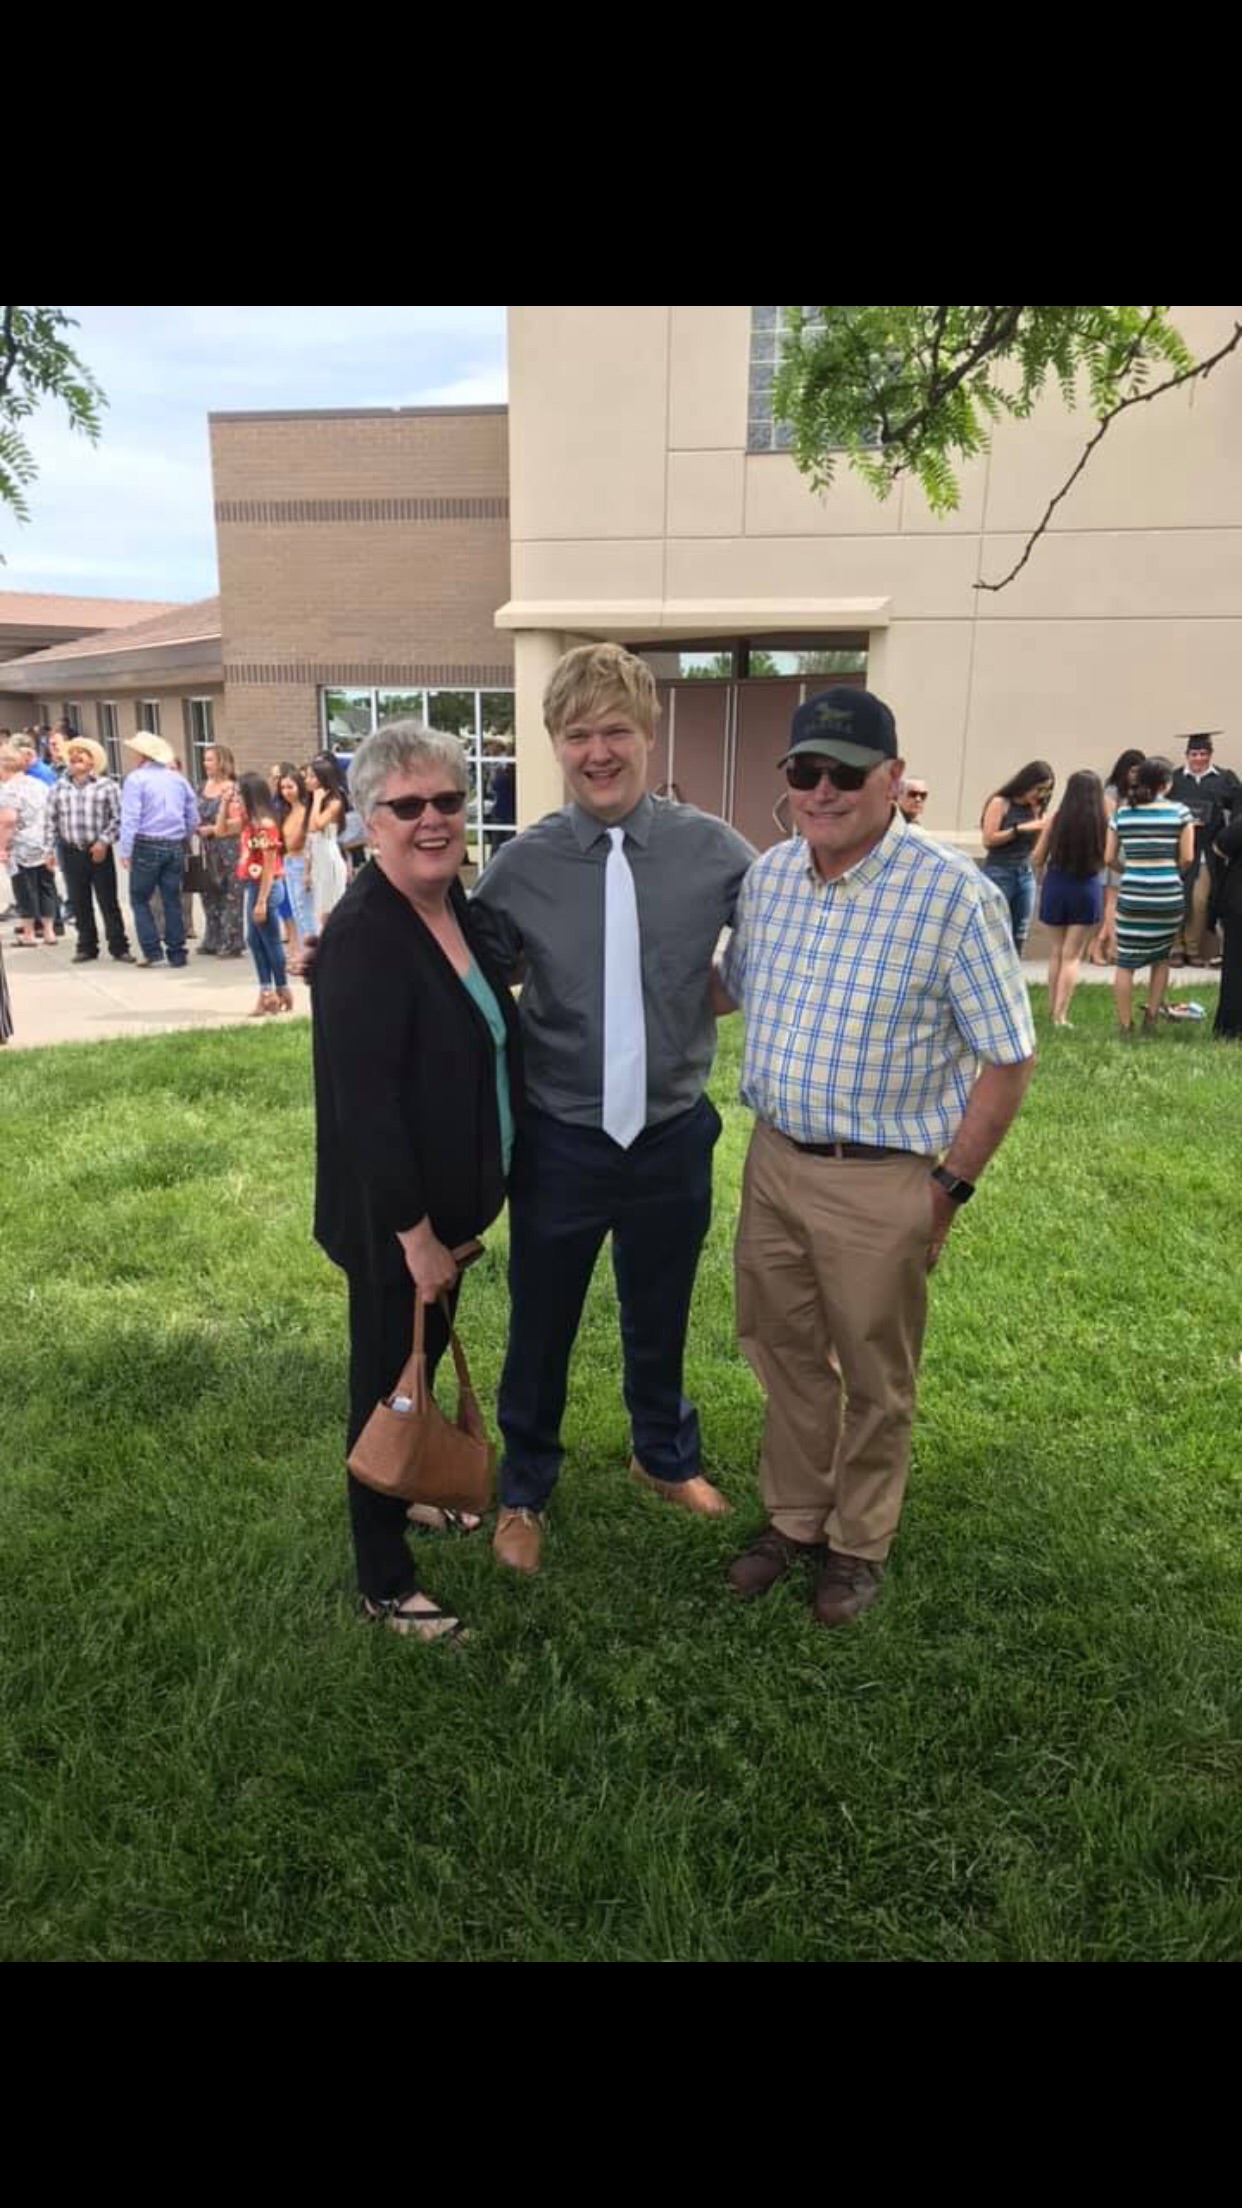 PHOTO: On May 19, Braxton Moral, 17, graduated Ulysses High School in Ulysses, Kansas. And on May 30, the 17-year-old will receive his undergraduate dress from Harvard Extension School.